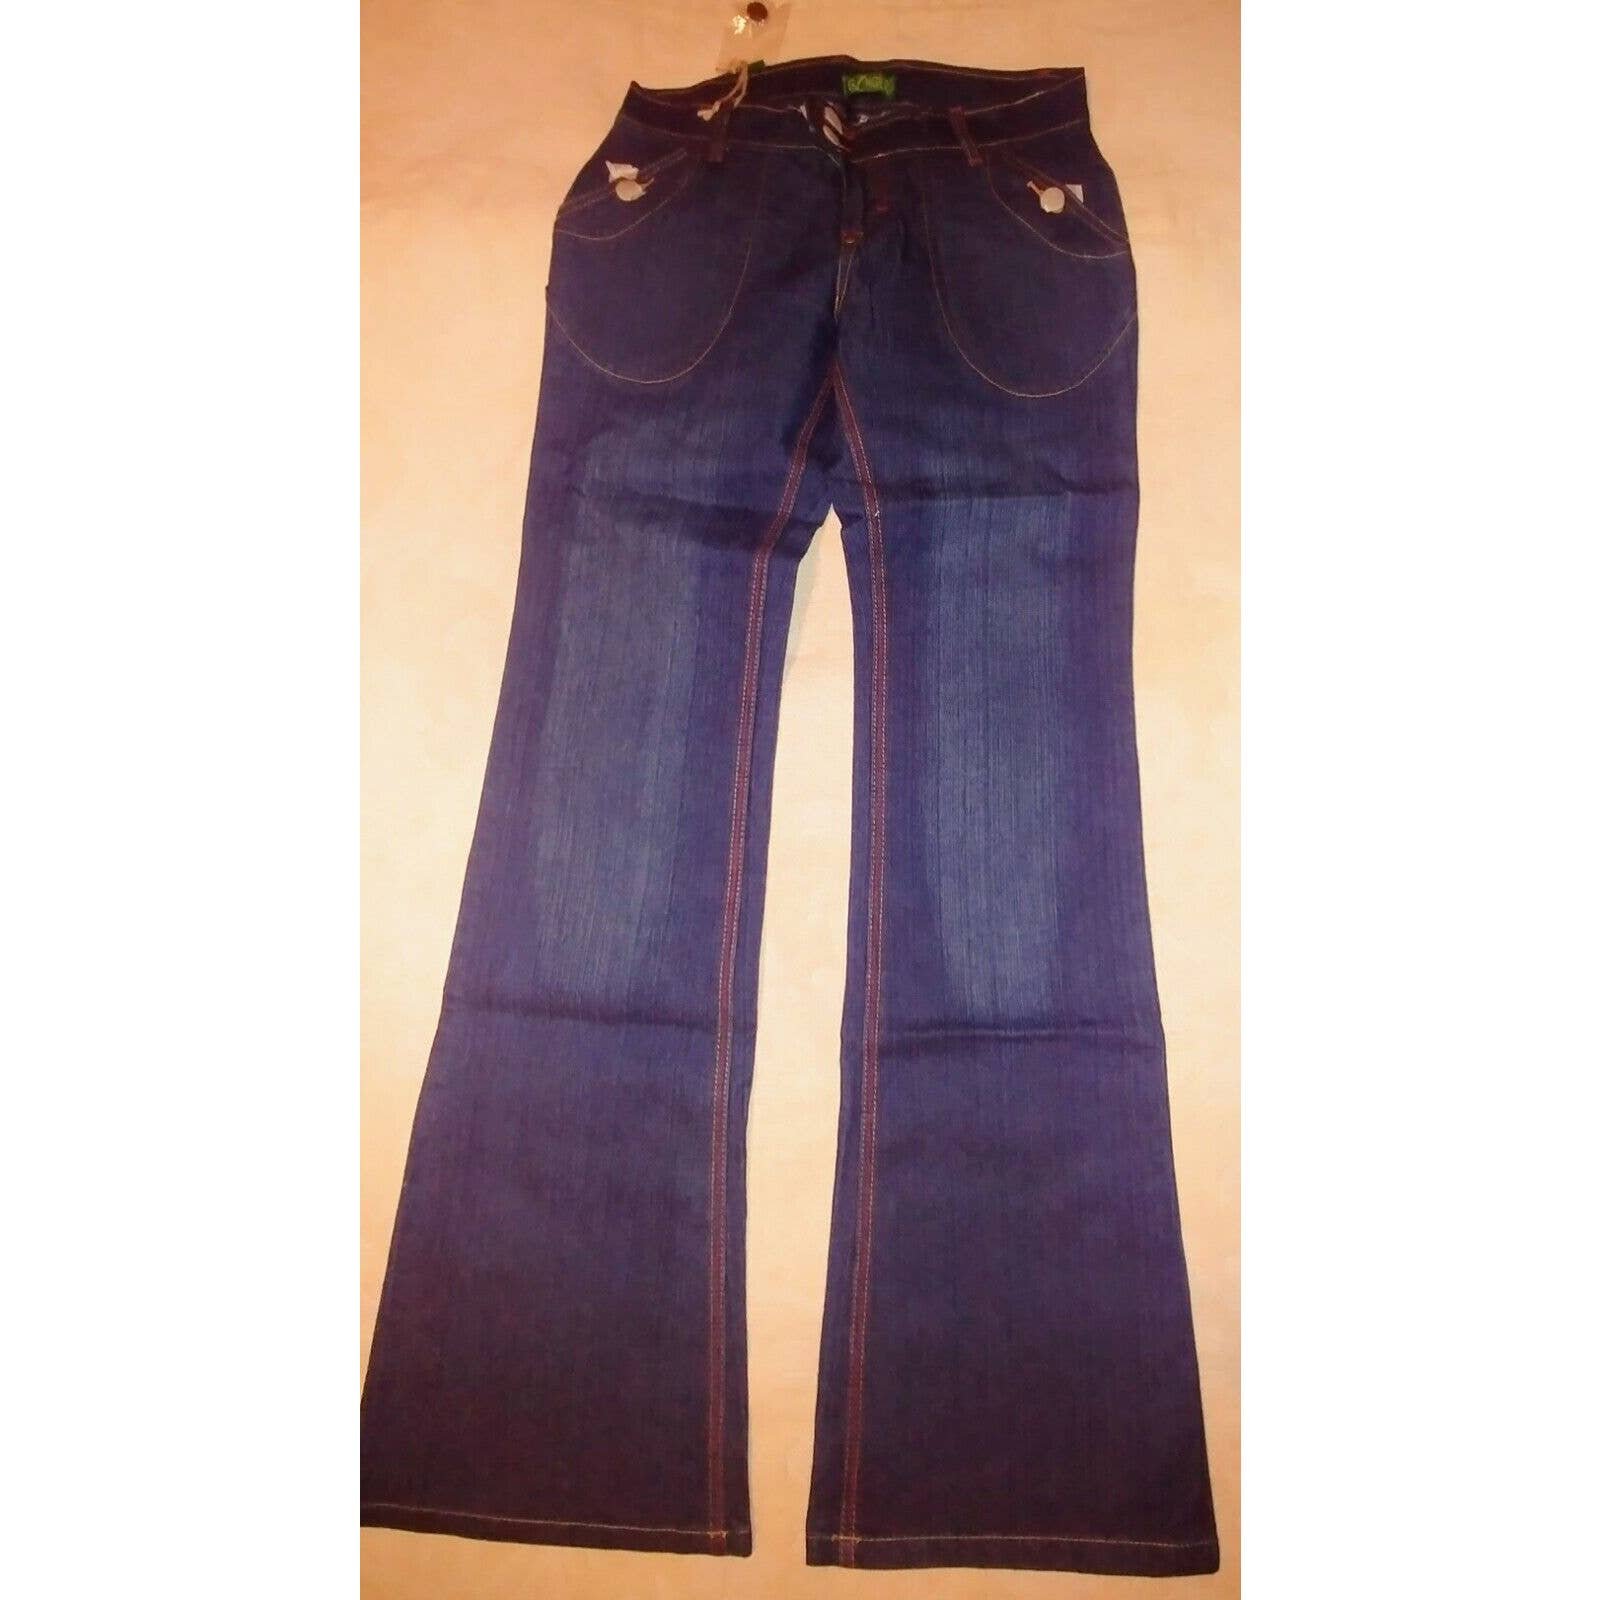 Cheap NWT G!nger wide leg jeans sz 7/8 (C21) GXmlsmGEY on sale